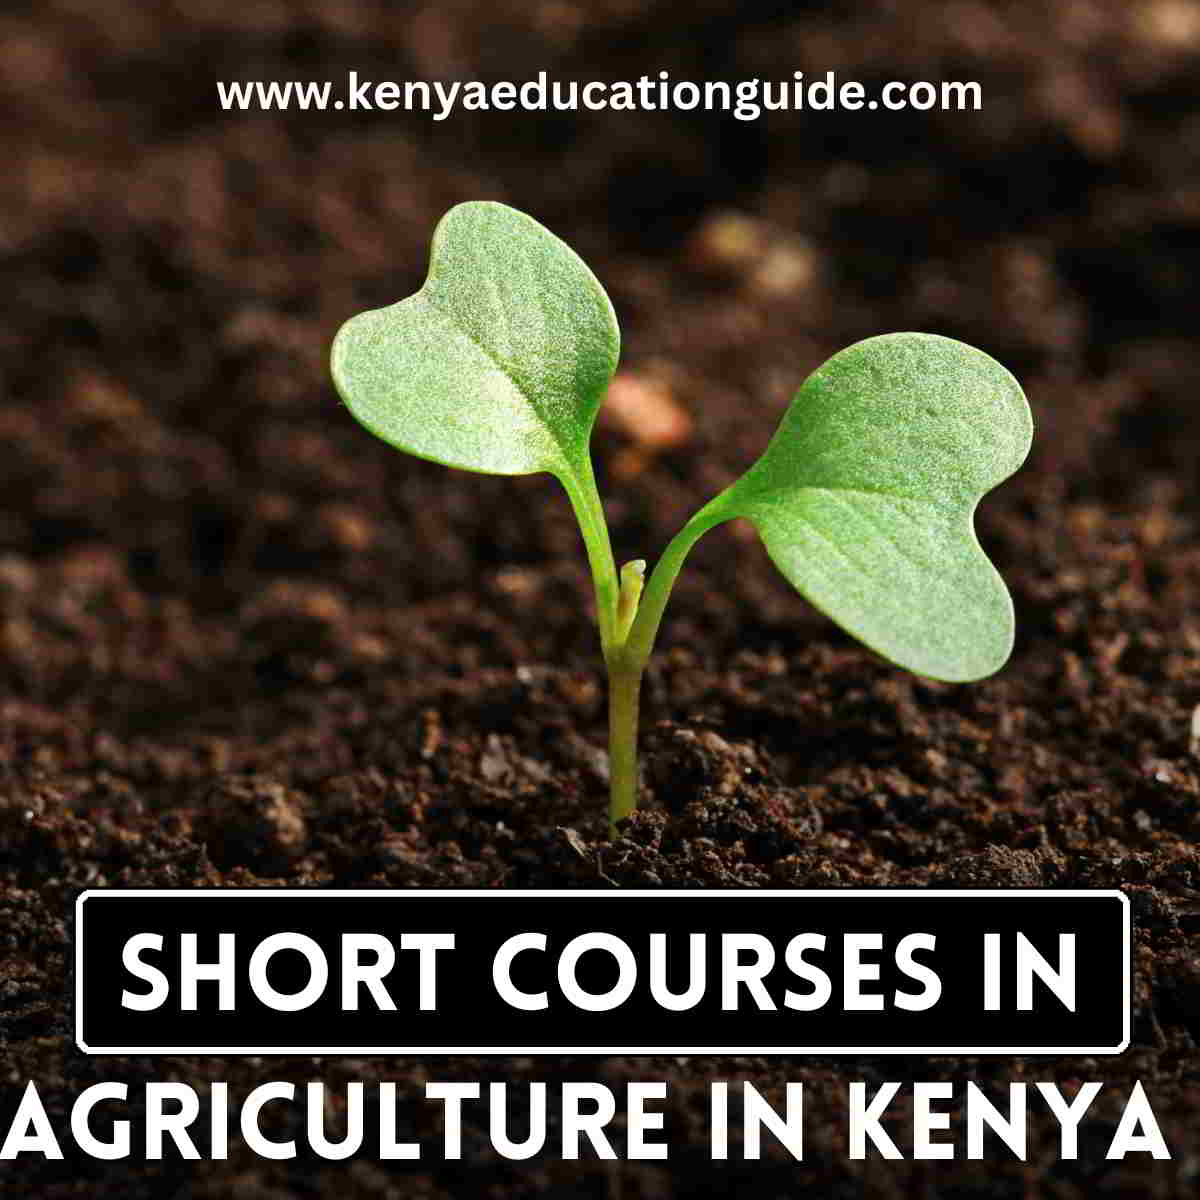 Short courses in agriculture in Kenya